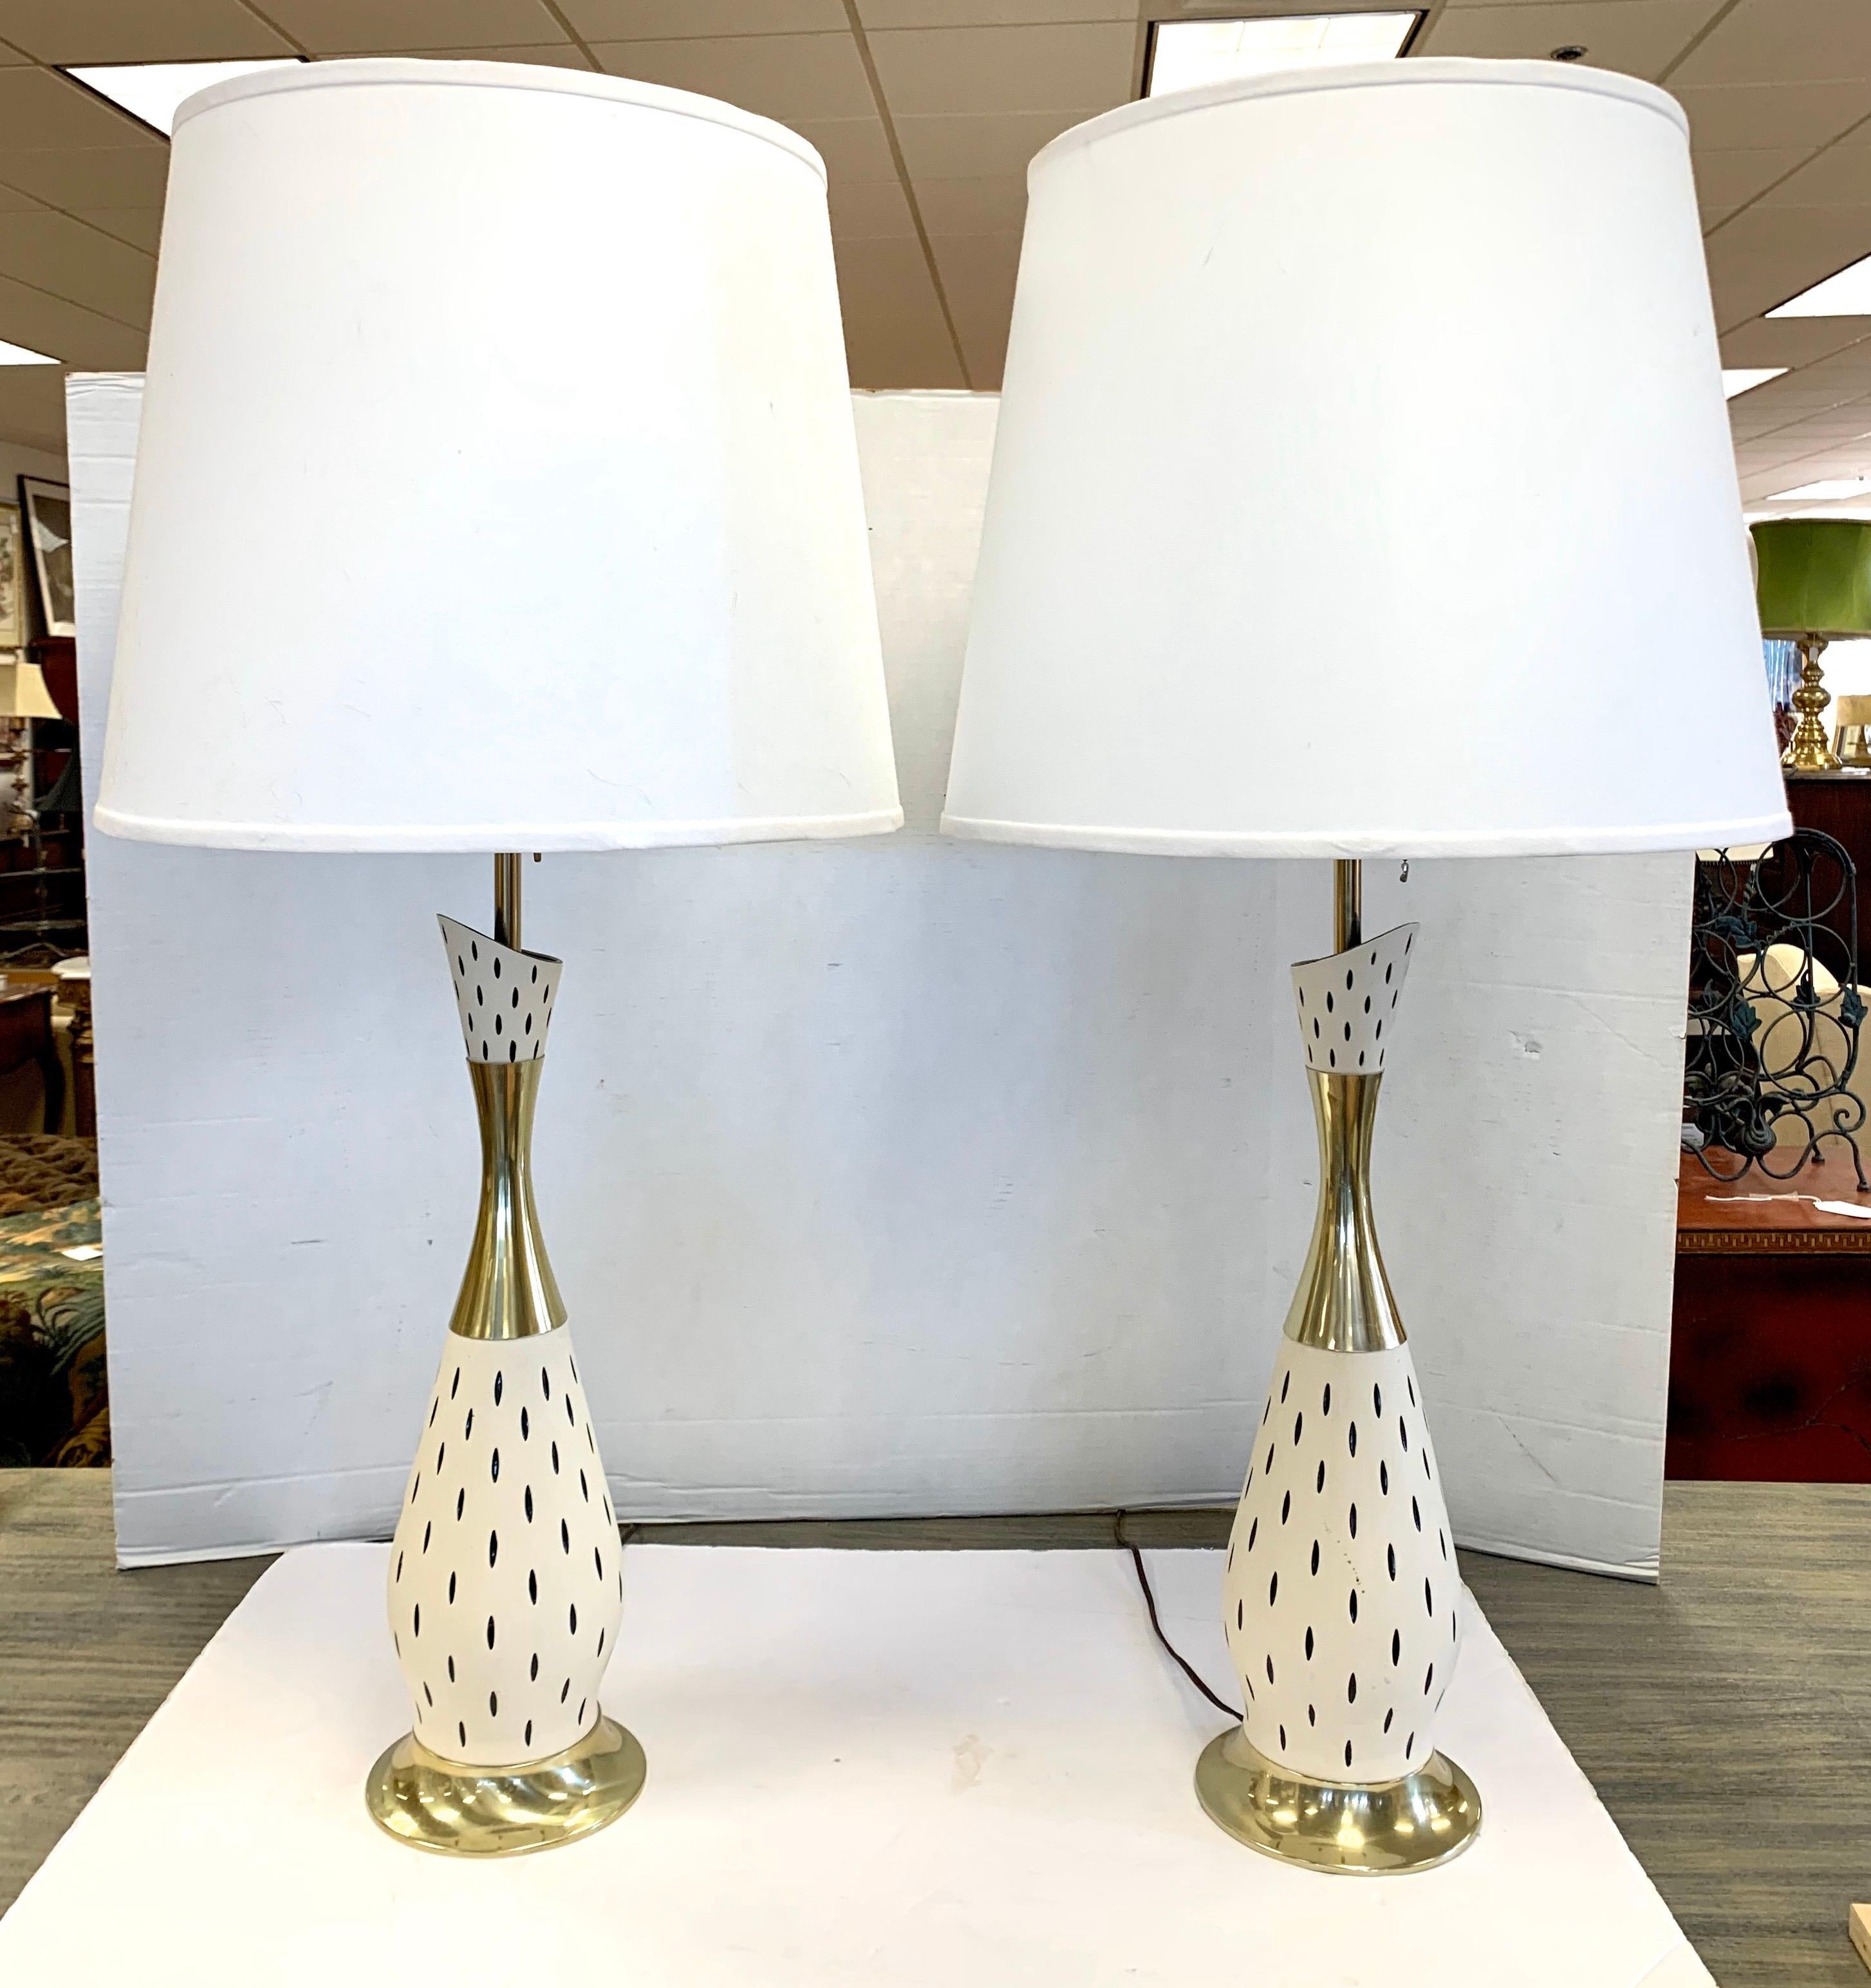 Made of brass and ceramic and colored with a gorgeous creamy off-white and black design, these lamps exude the iconic midcentury look that is so coveted. They have custom made shades that measure 19